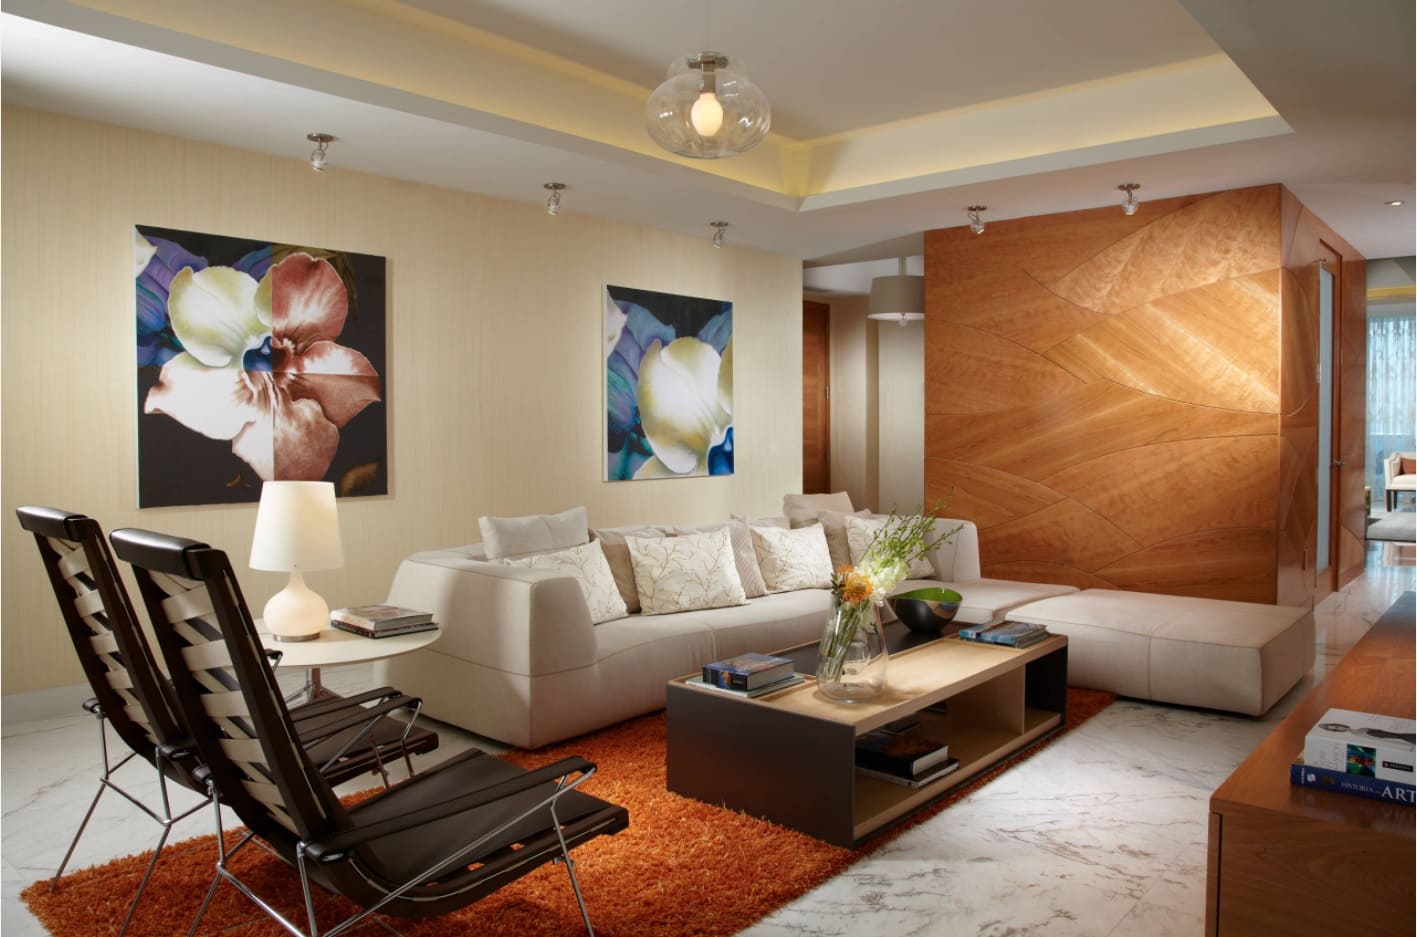 Laminated wooden accent wall and original form of coffee table for large living zone